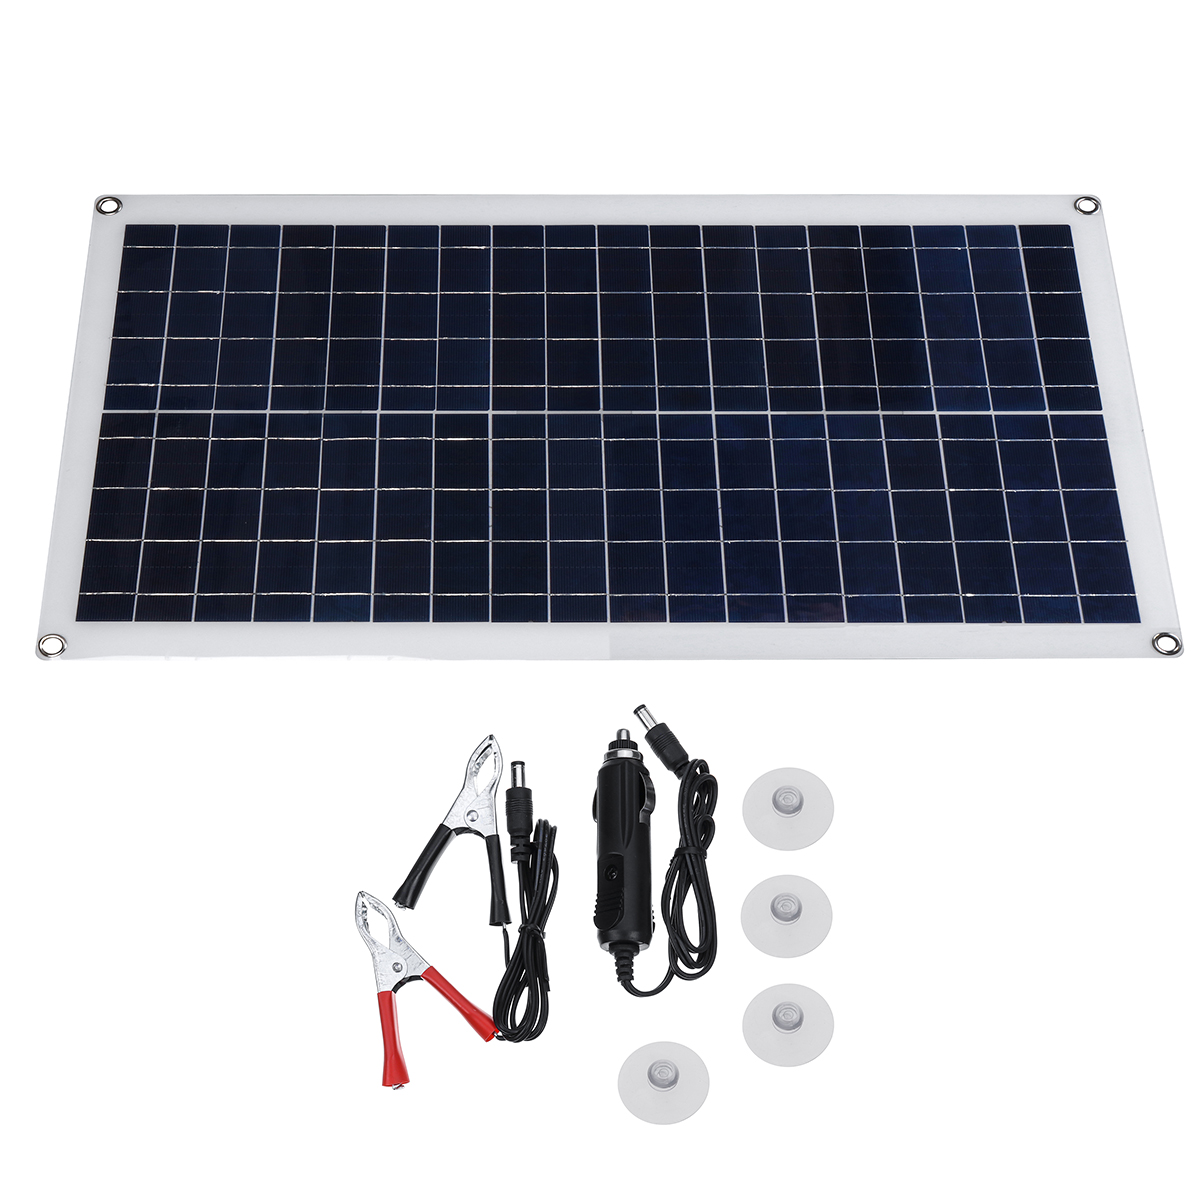 

18v 40W 630*370*3.0mm Dual USB Interface PET Polysilicon Solar Panel with Line + 4 Suction Cup Set for 12V Battery Charge Camping Outdoor Work